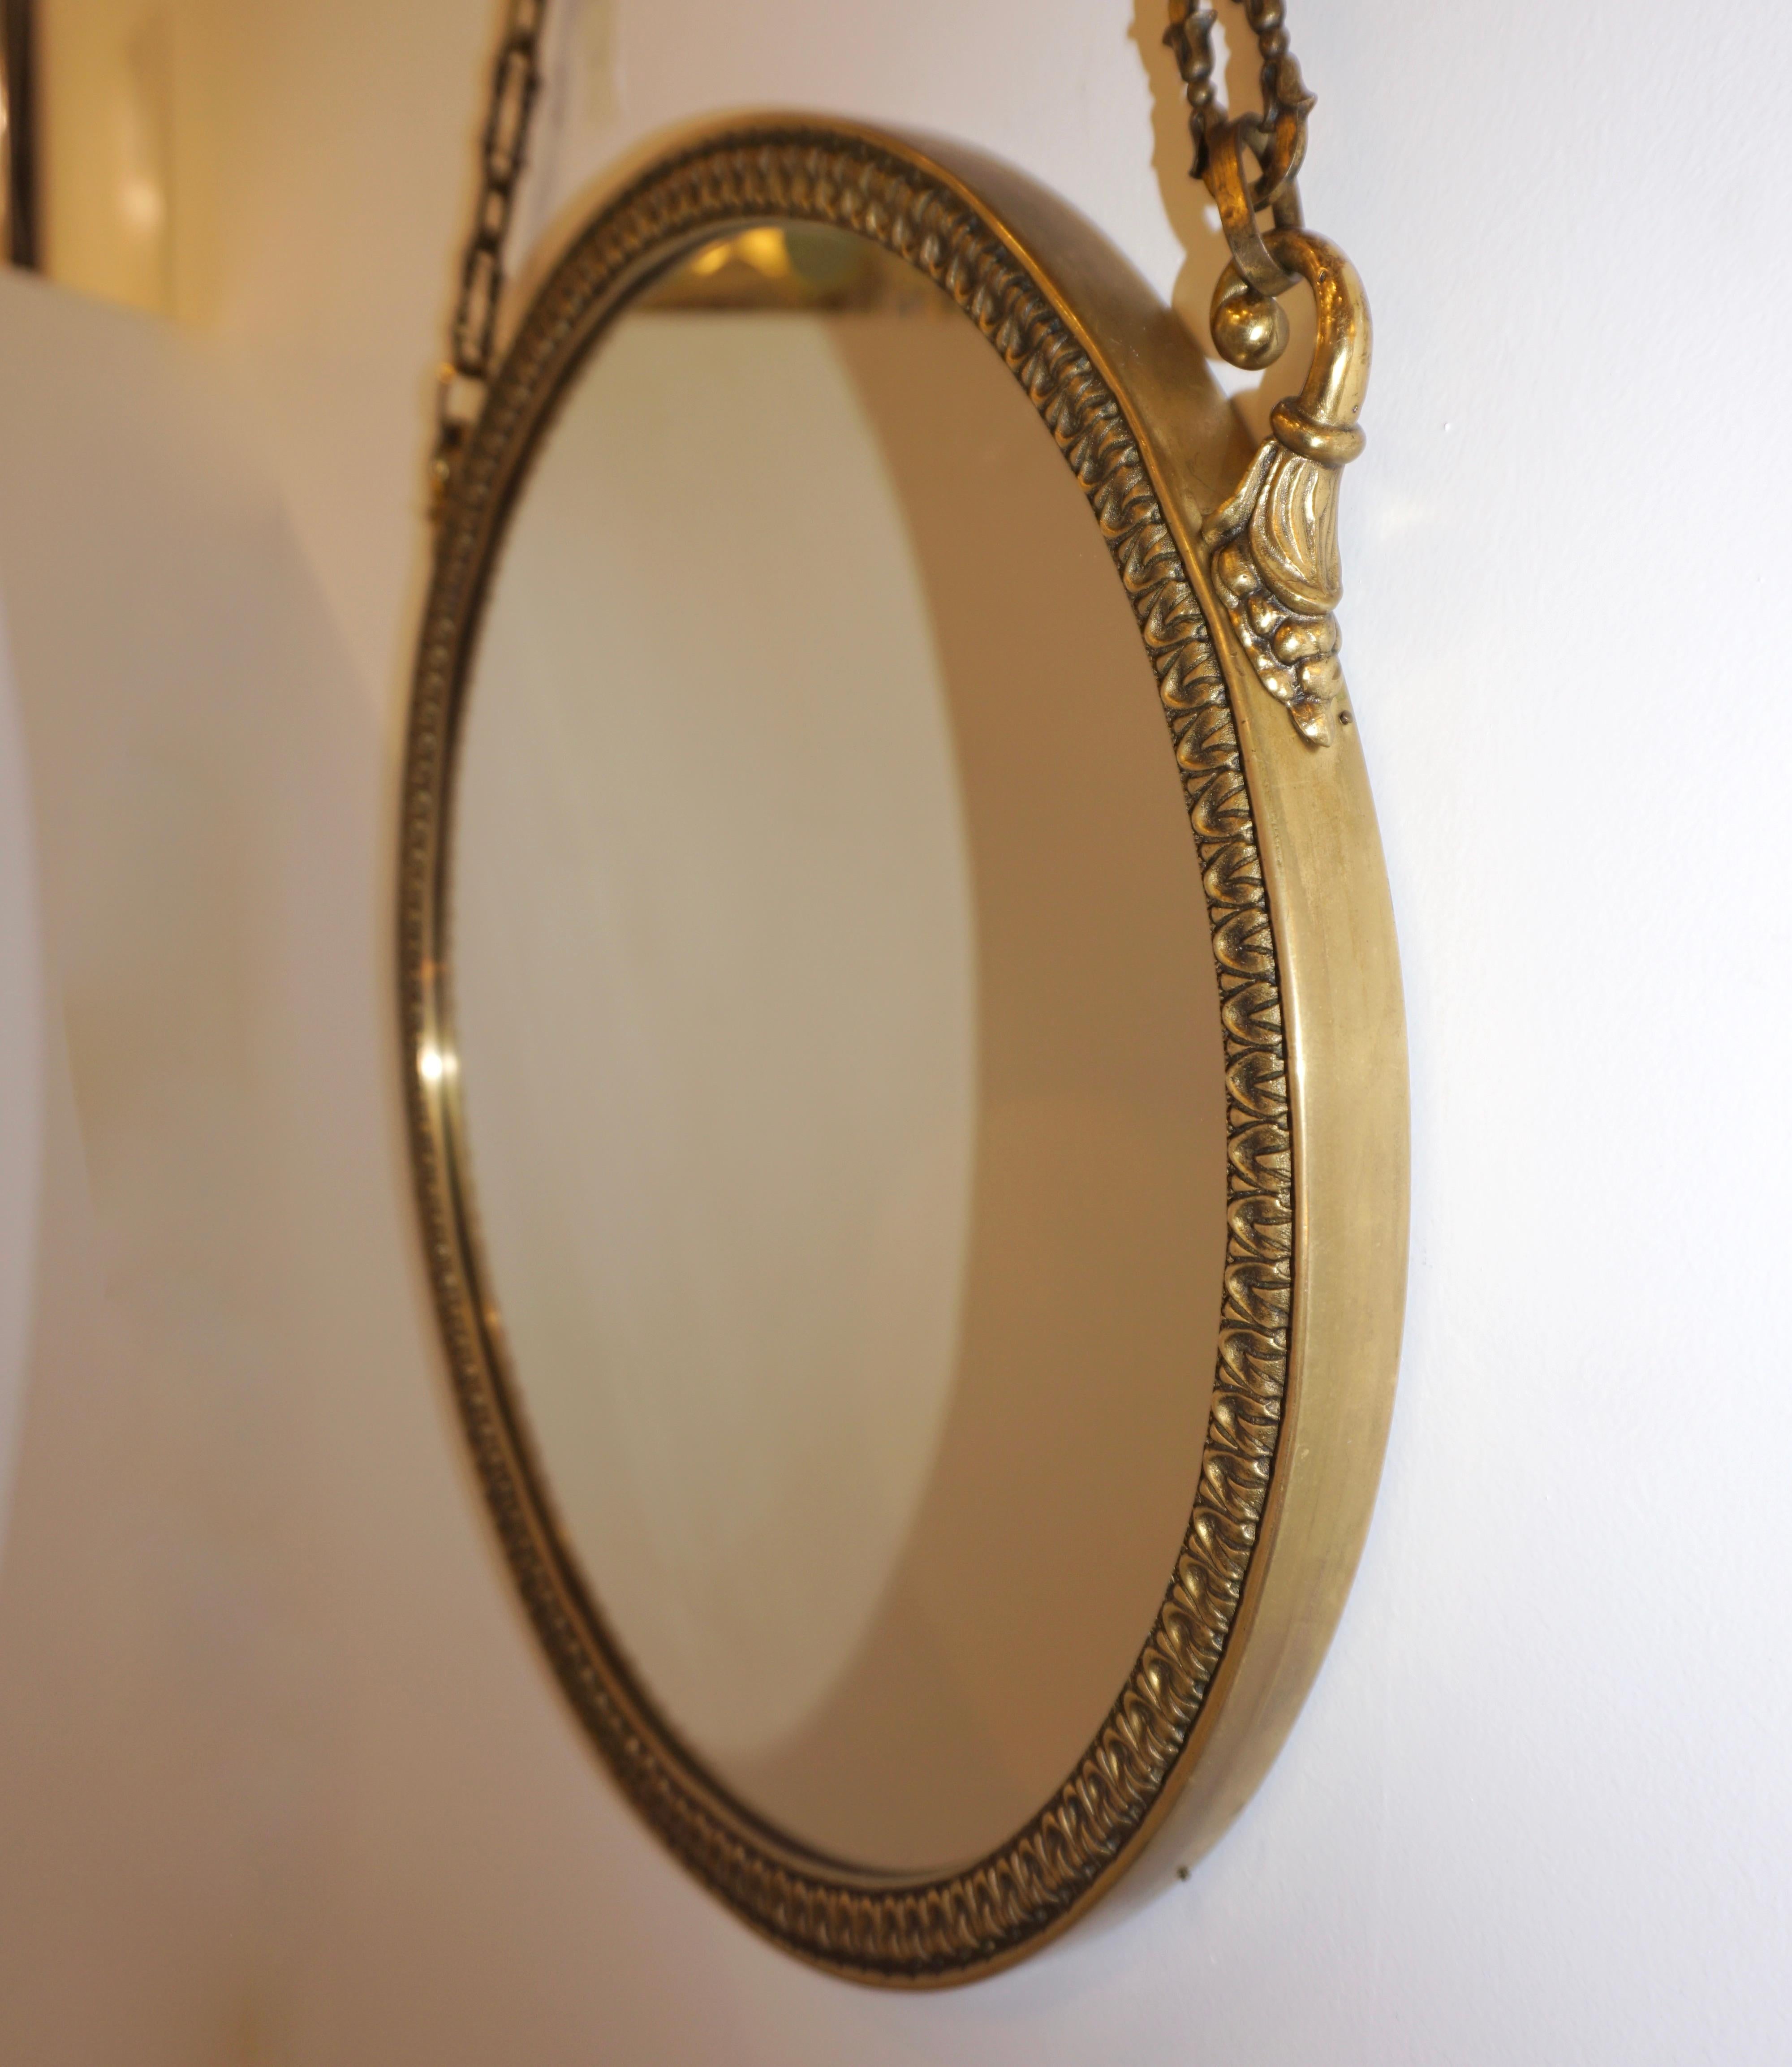 vintage hanging mirror with chain